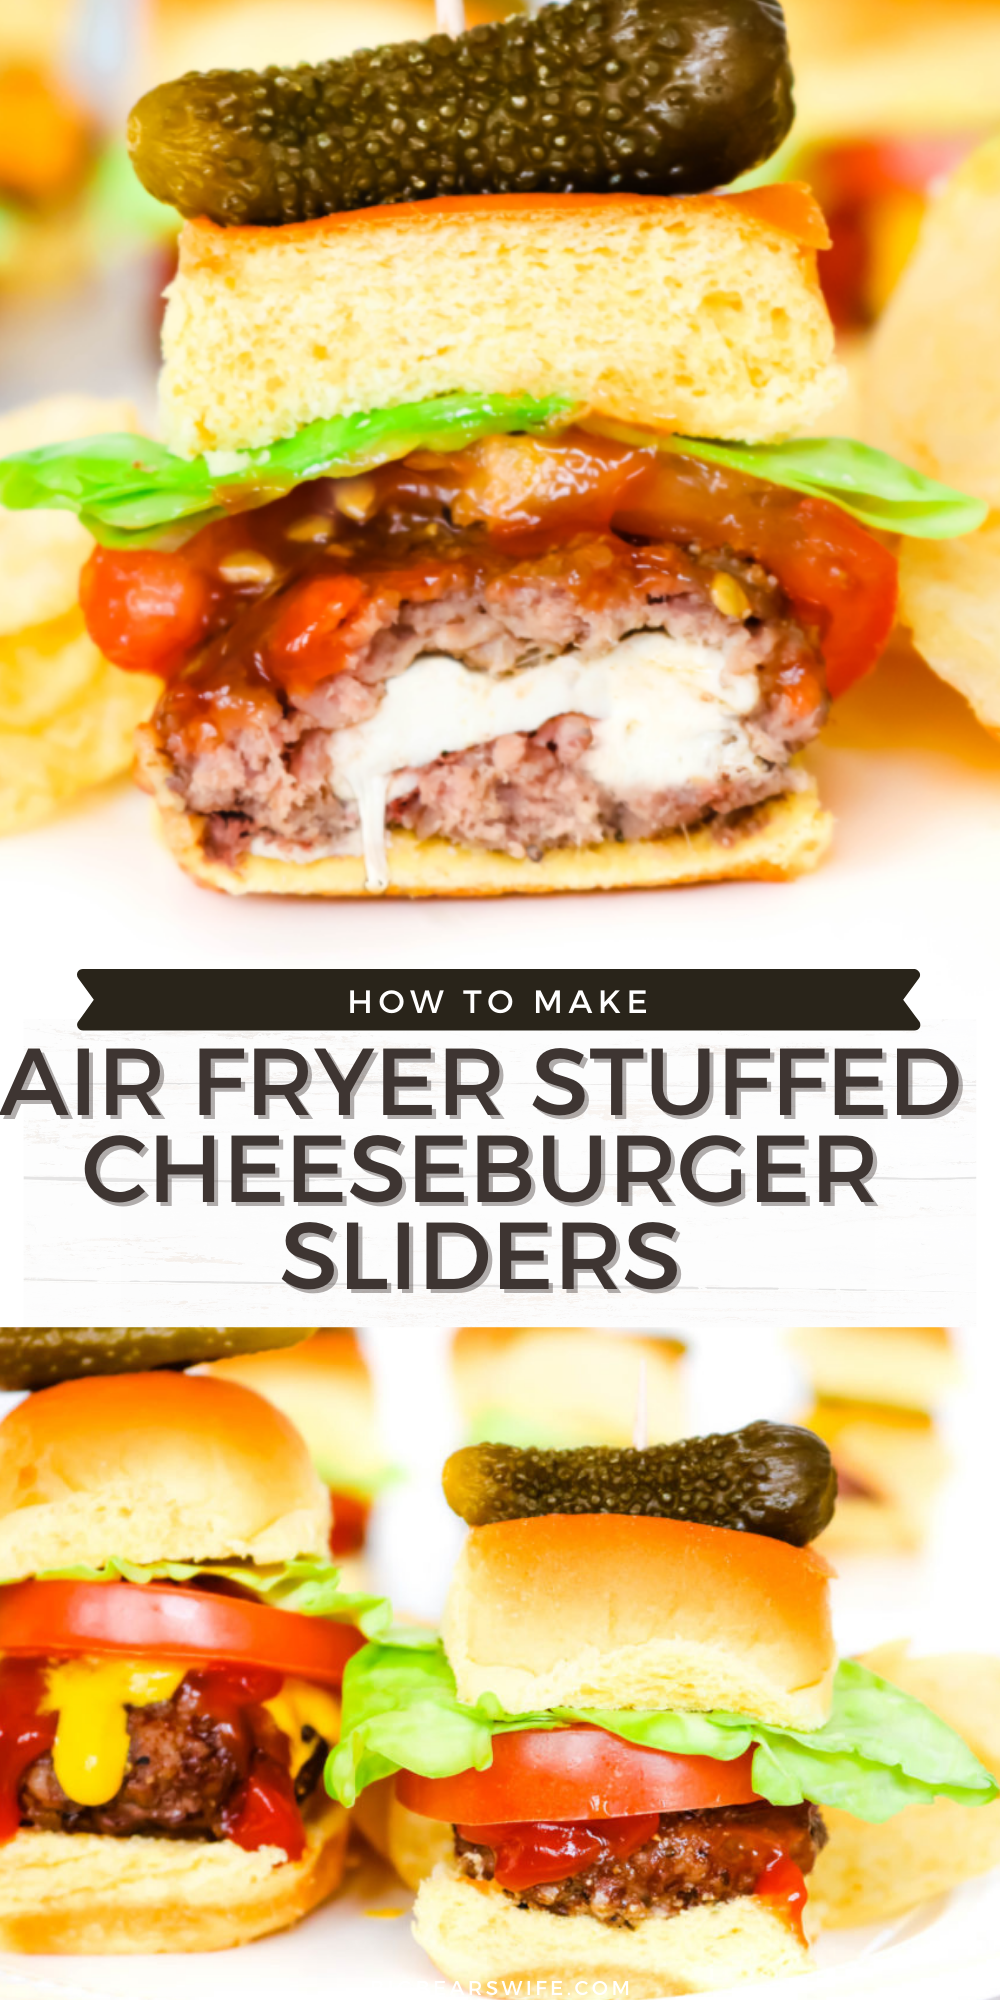 These sliders are stuffed with fresh mozzarella cheese, air-fried and topped with your favorite toppings to create the most amazing Stuffed Cheeseburger Sliders! These are perfect for game day parties or weeknight dinners.  via @bigbearswife